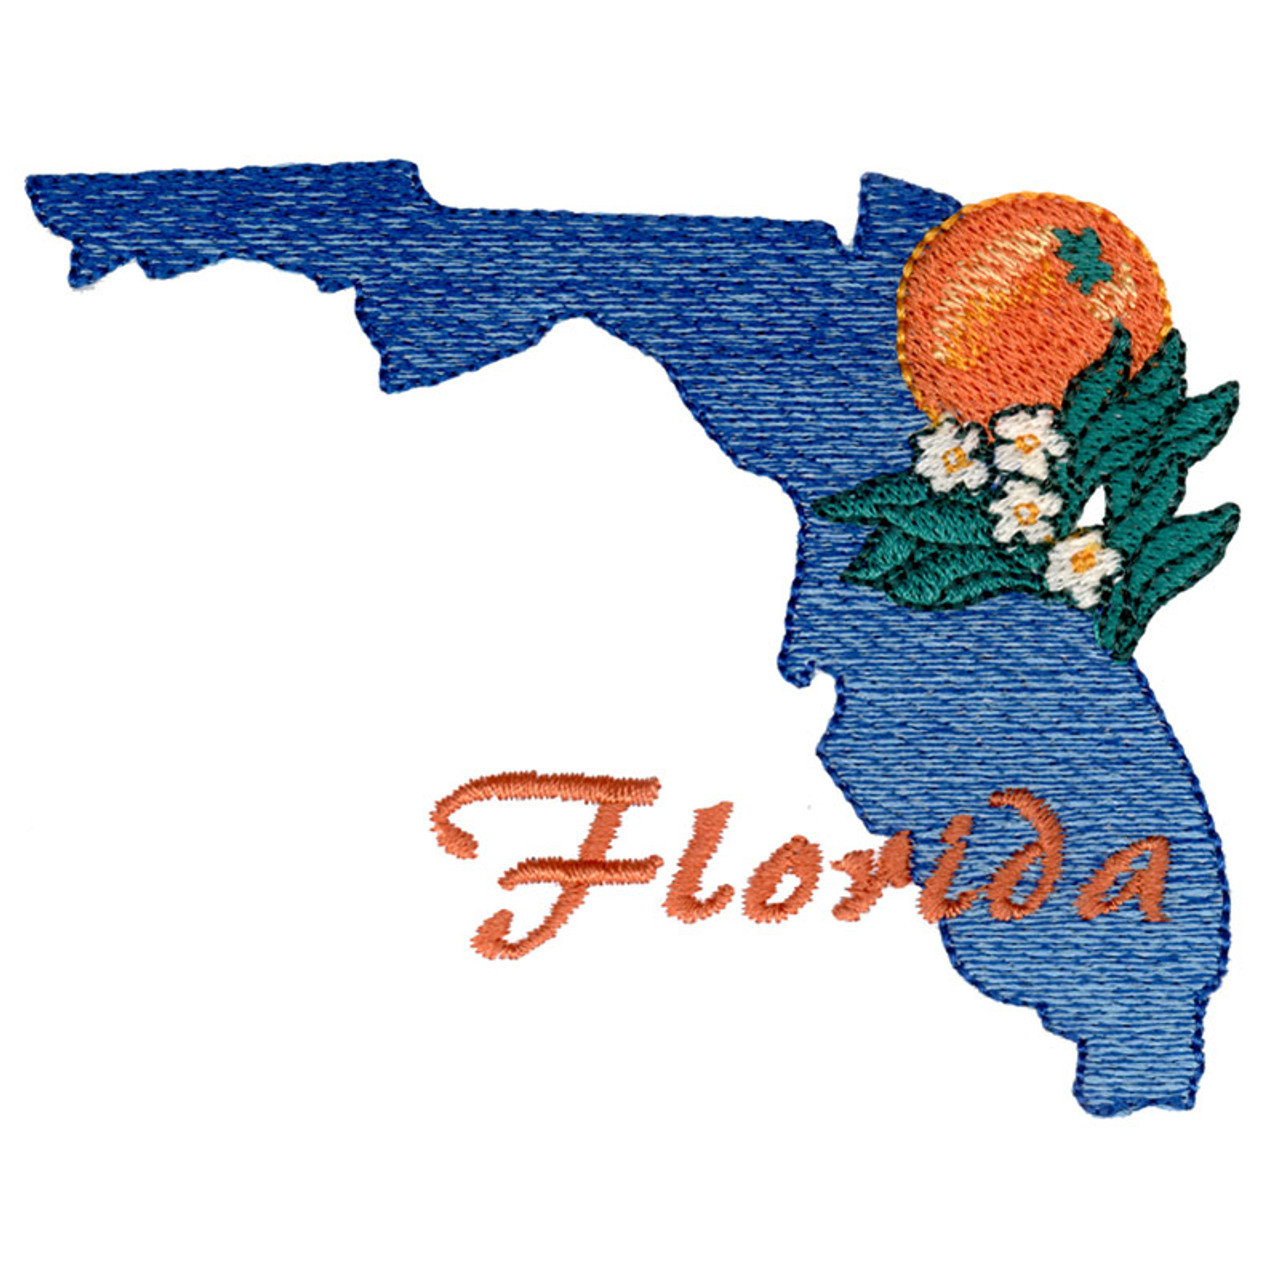 Get to Know Florida's State Flower – The Orange Blossom